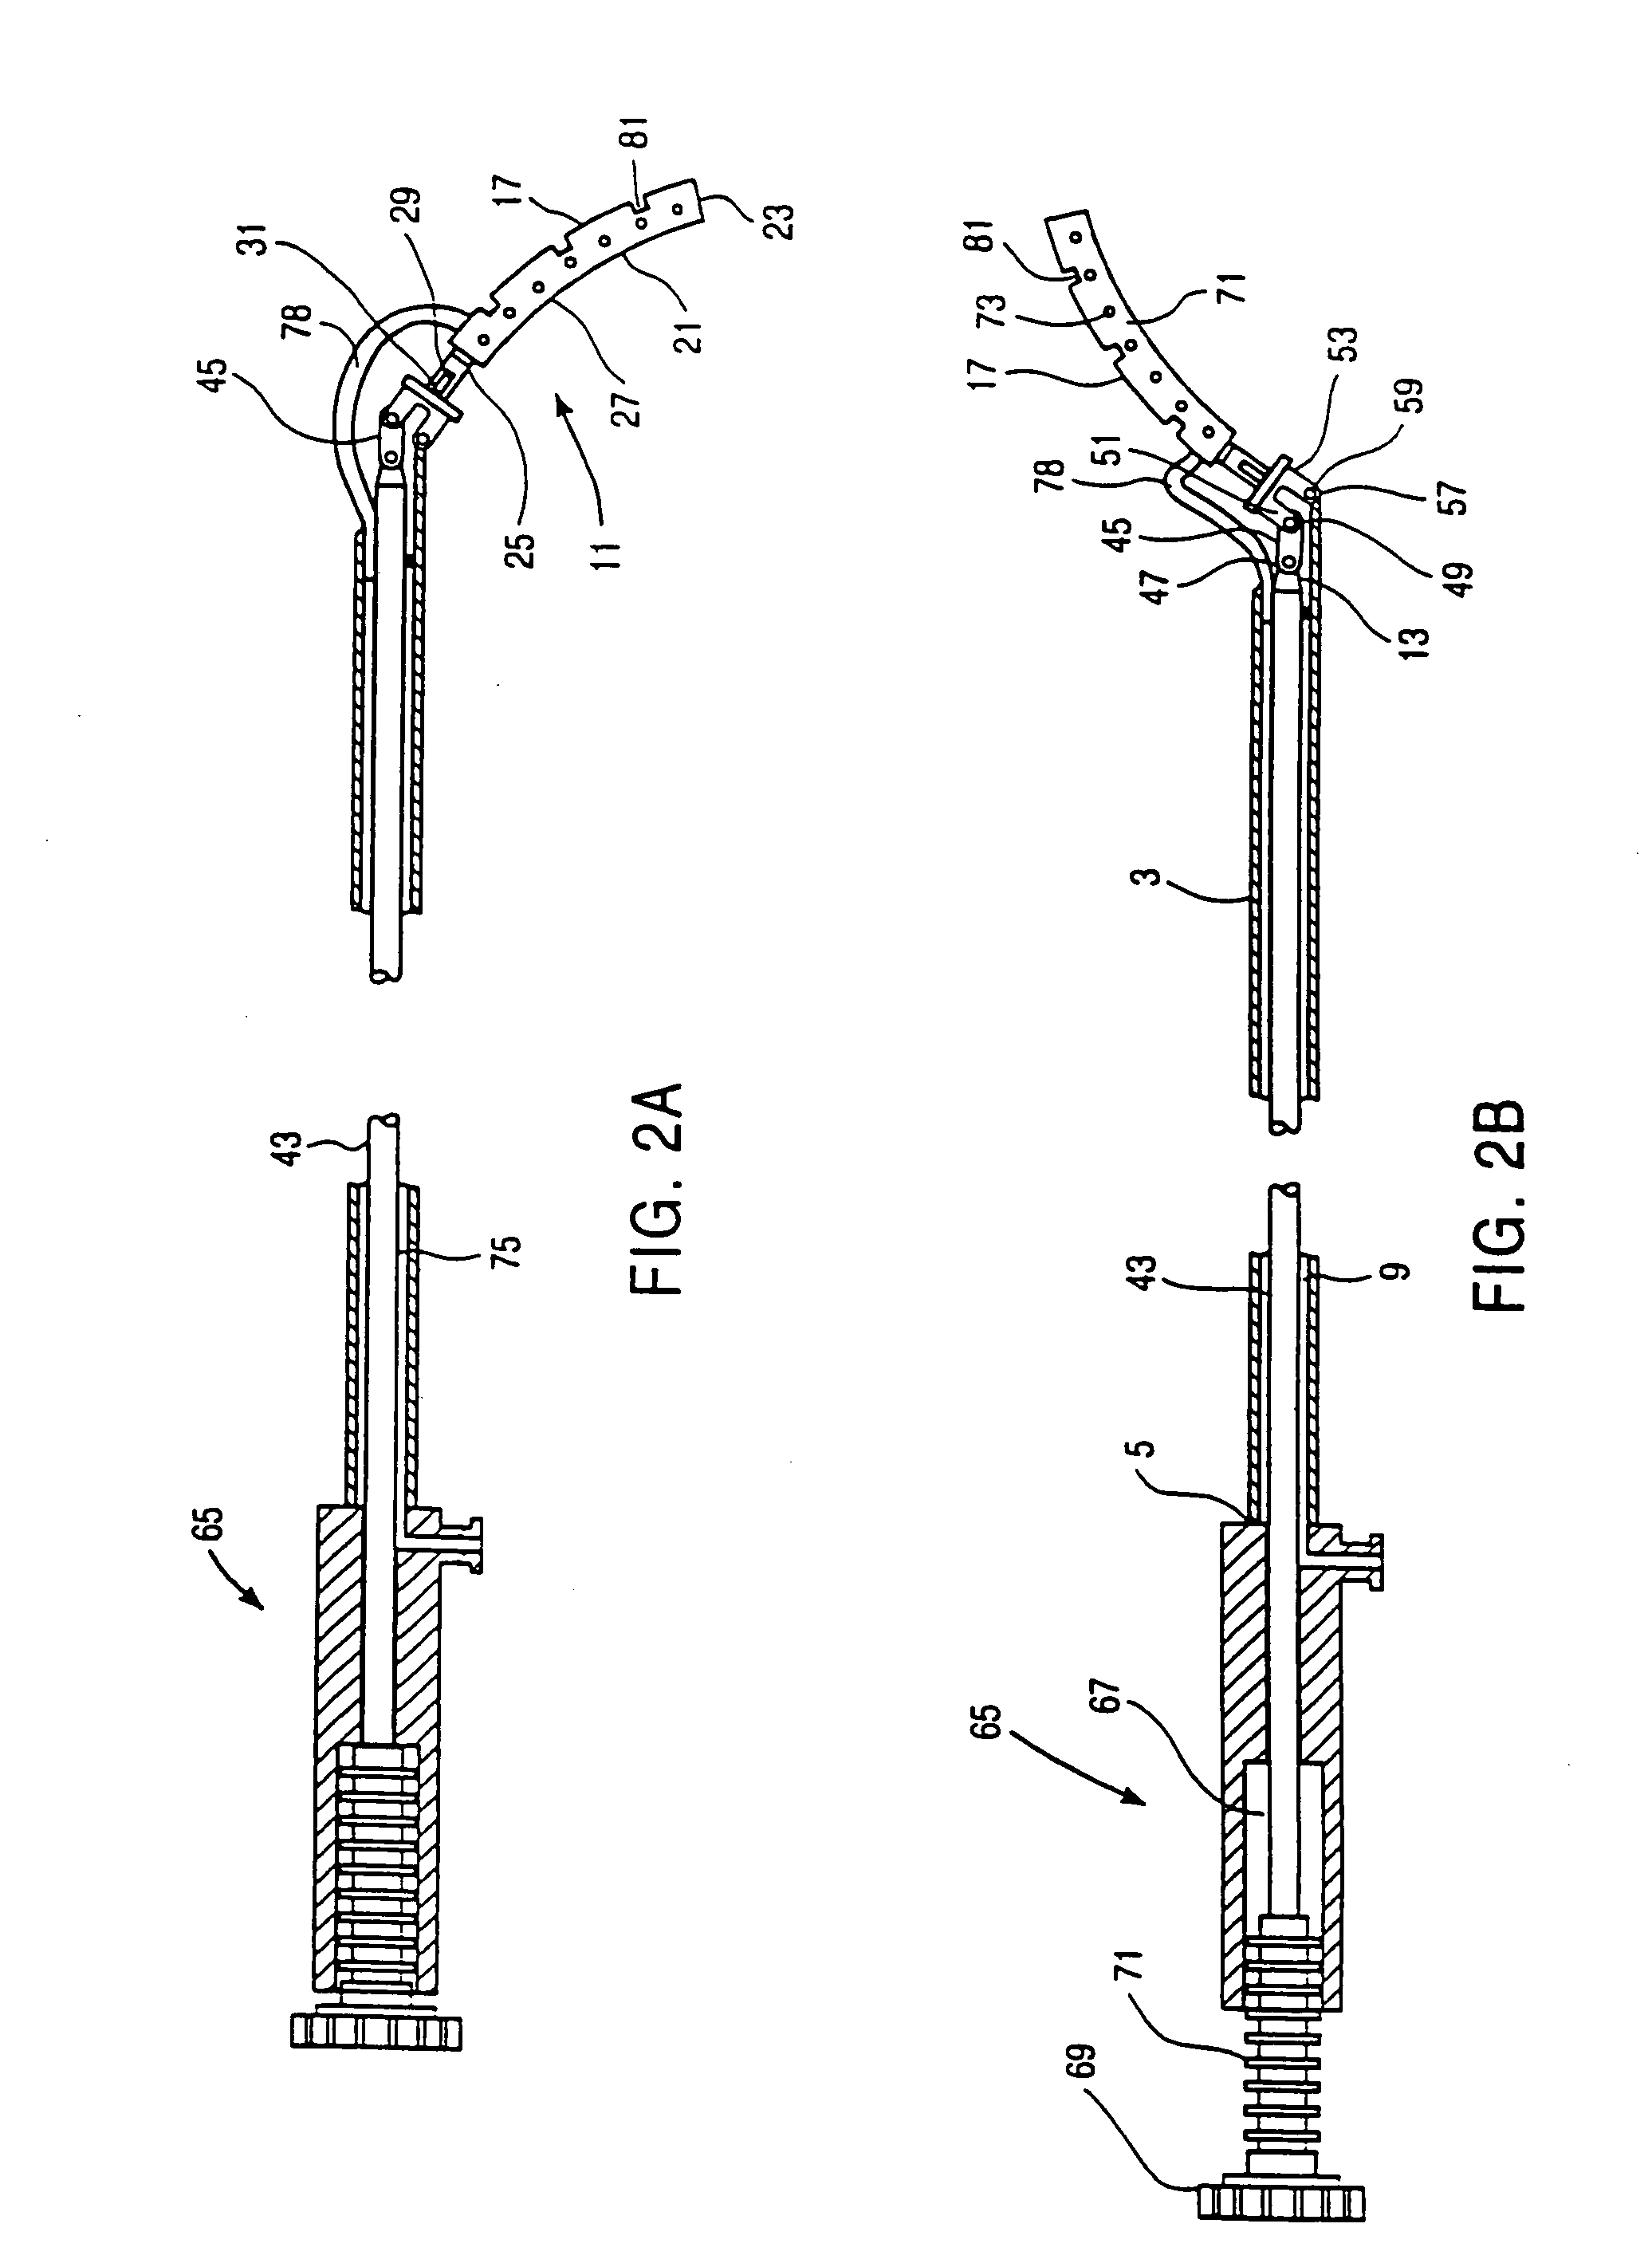 Device and method for isolating a surgical site